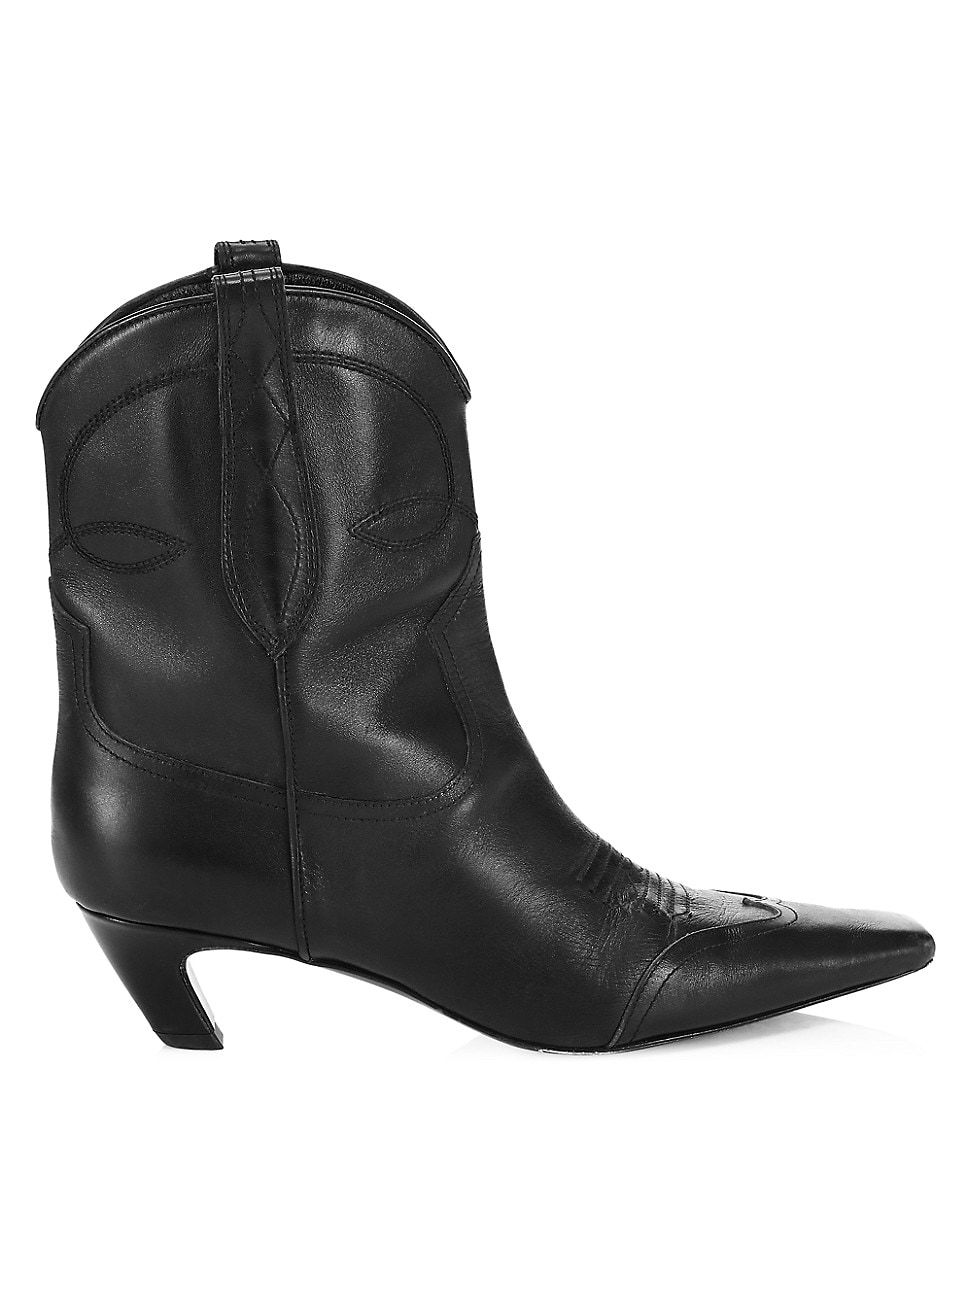 Women's Dallas Leather Ankle Boots - Black - Size 7 | Saks Fifth Avenue